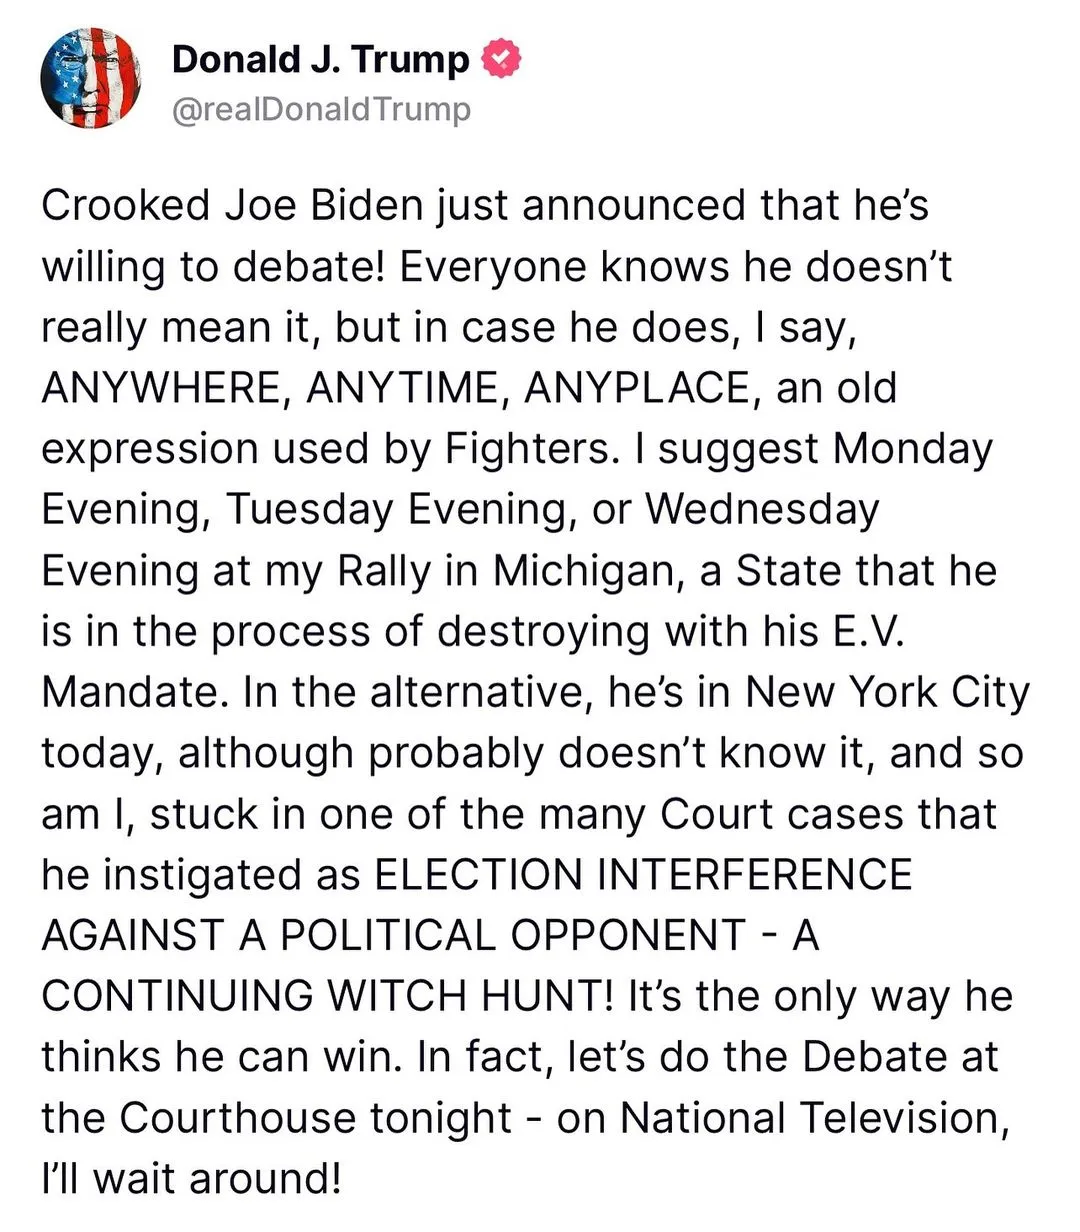 Trump's recent reaction on Truth Social about Biden agreeing for the debate